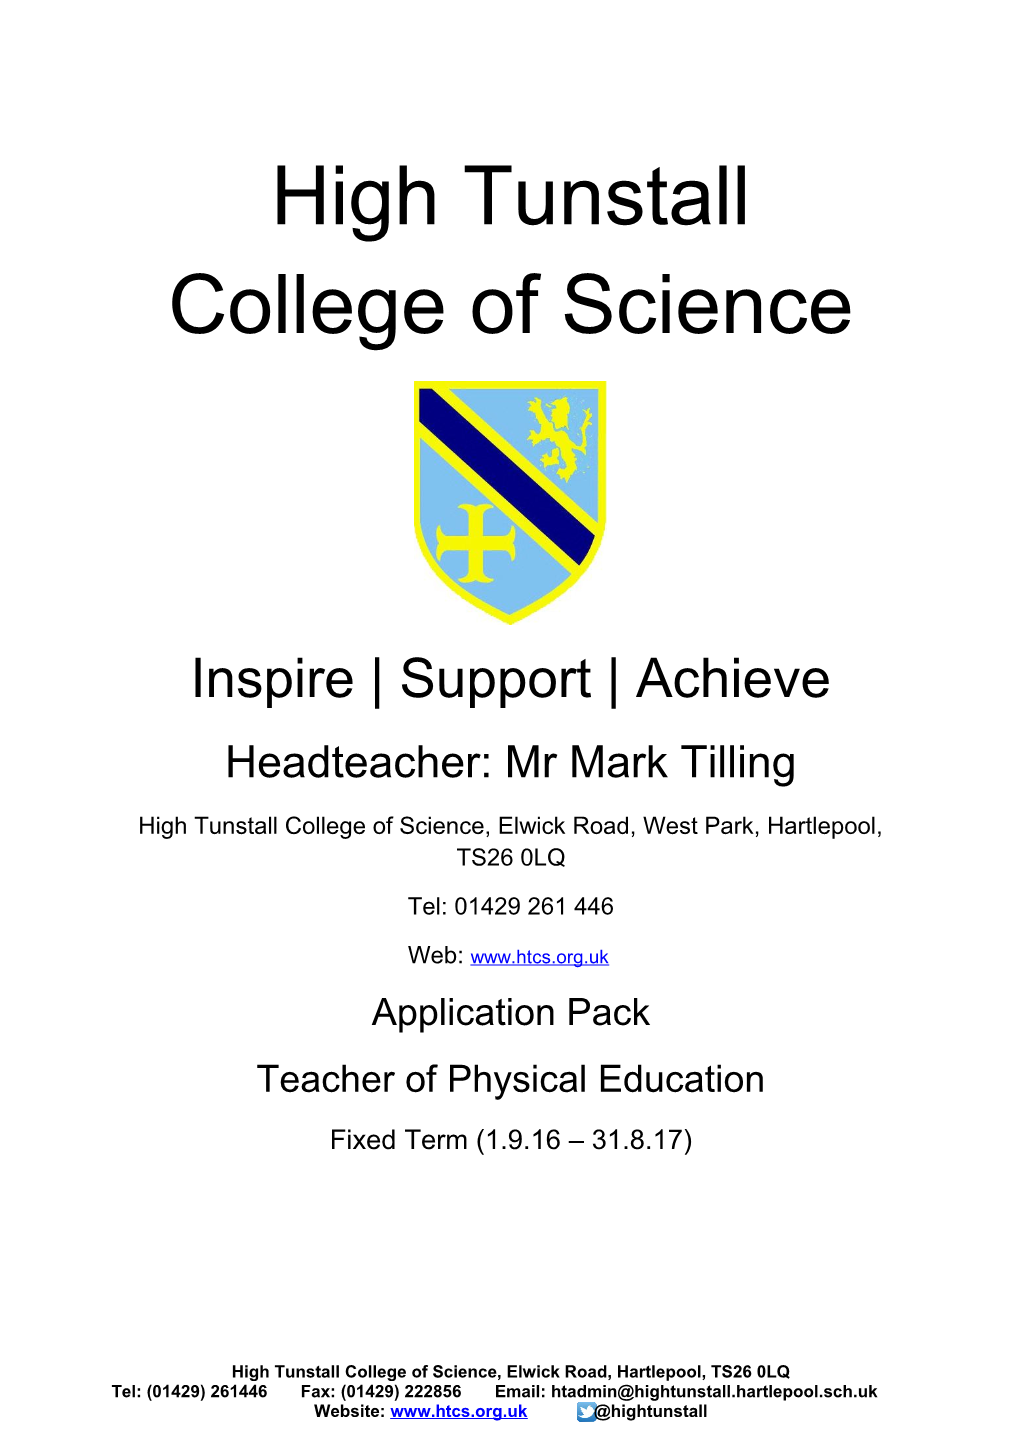 High Tunstall College of Science